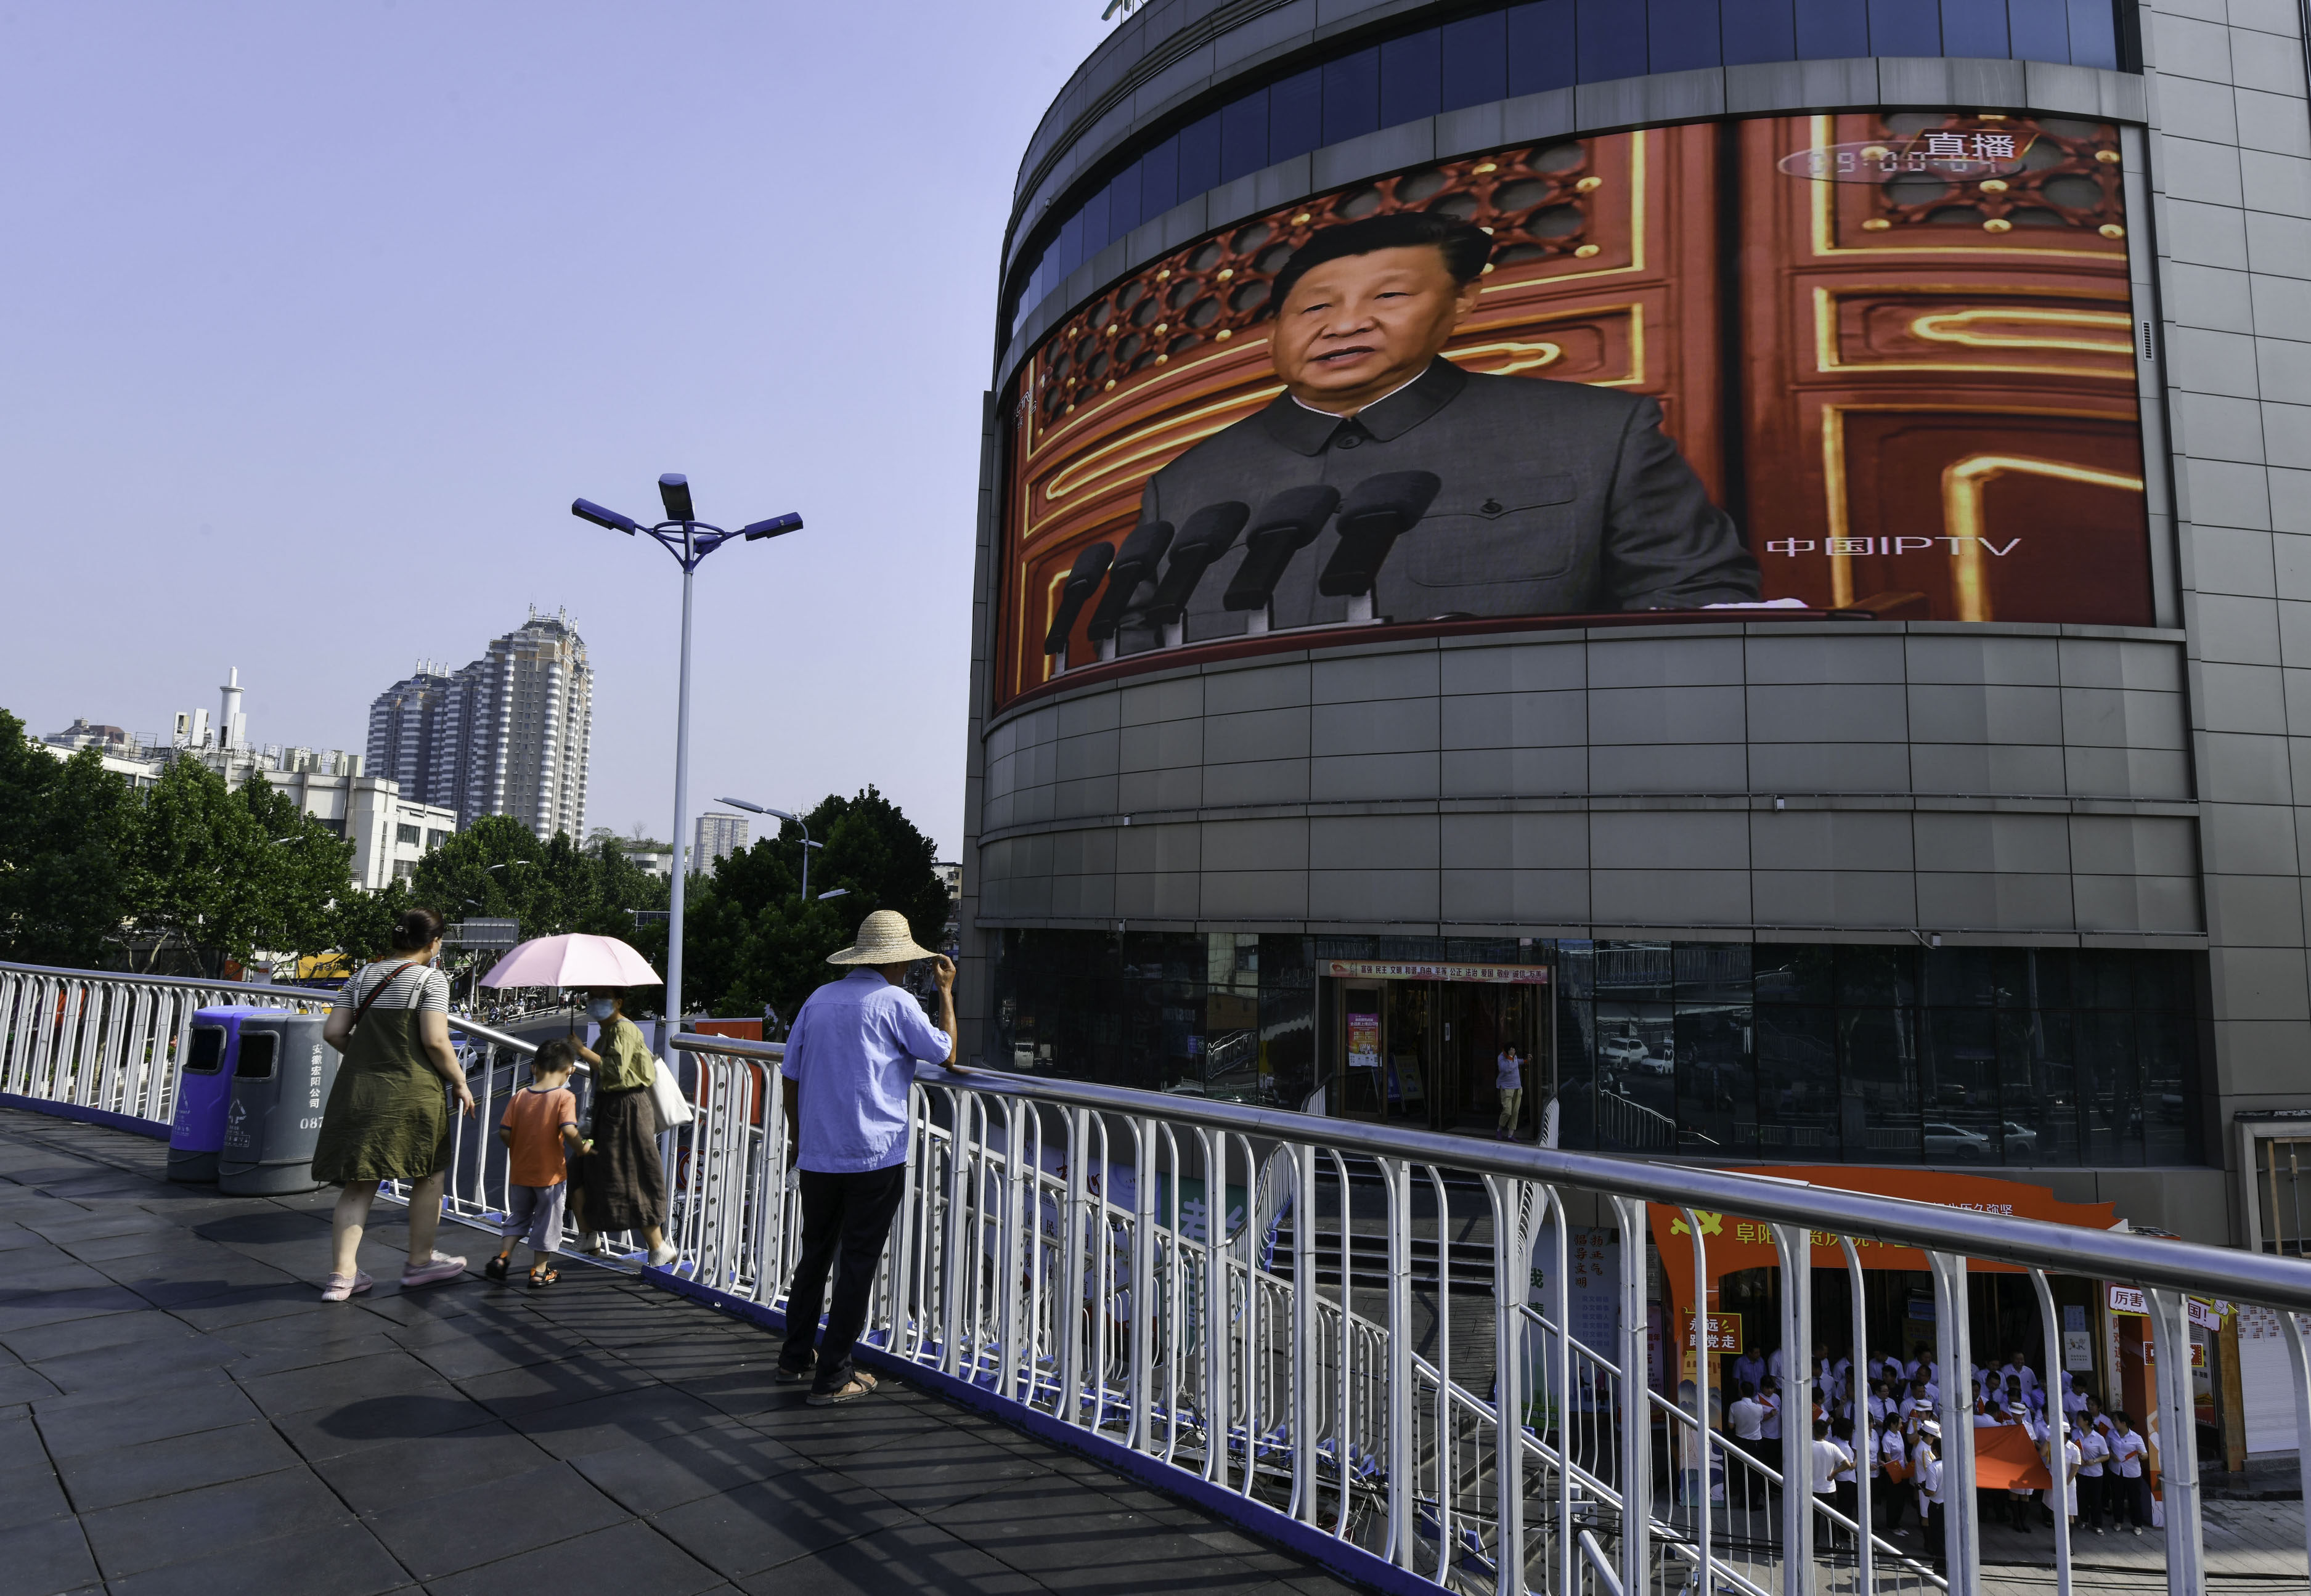 A giant screen in the Anhui provincial city of Fuyang broadcasting a speech by the Chinese President Xi Jinping on July 1, 2021 during the centenary celebrations of the ruling Communist Part of China (CPC). Photo: SOPA Images/LightRocket via Getty Images